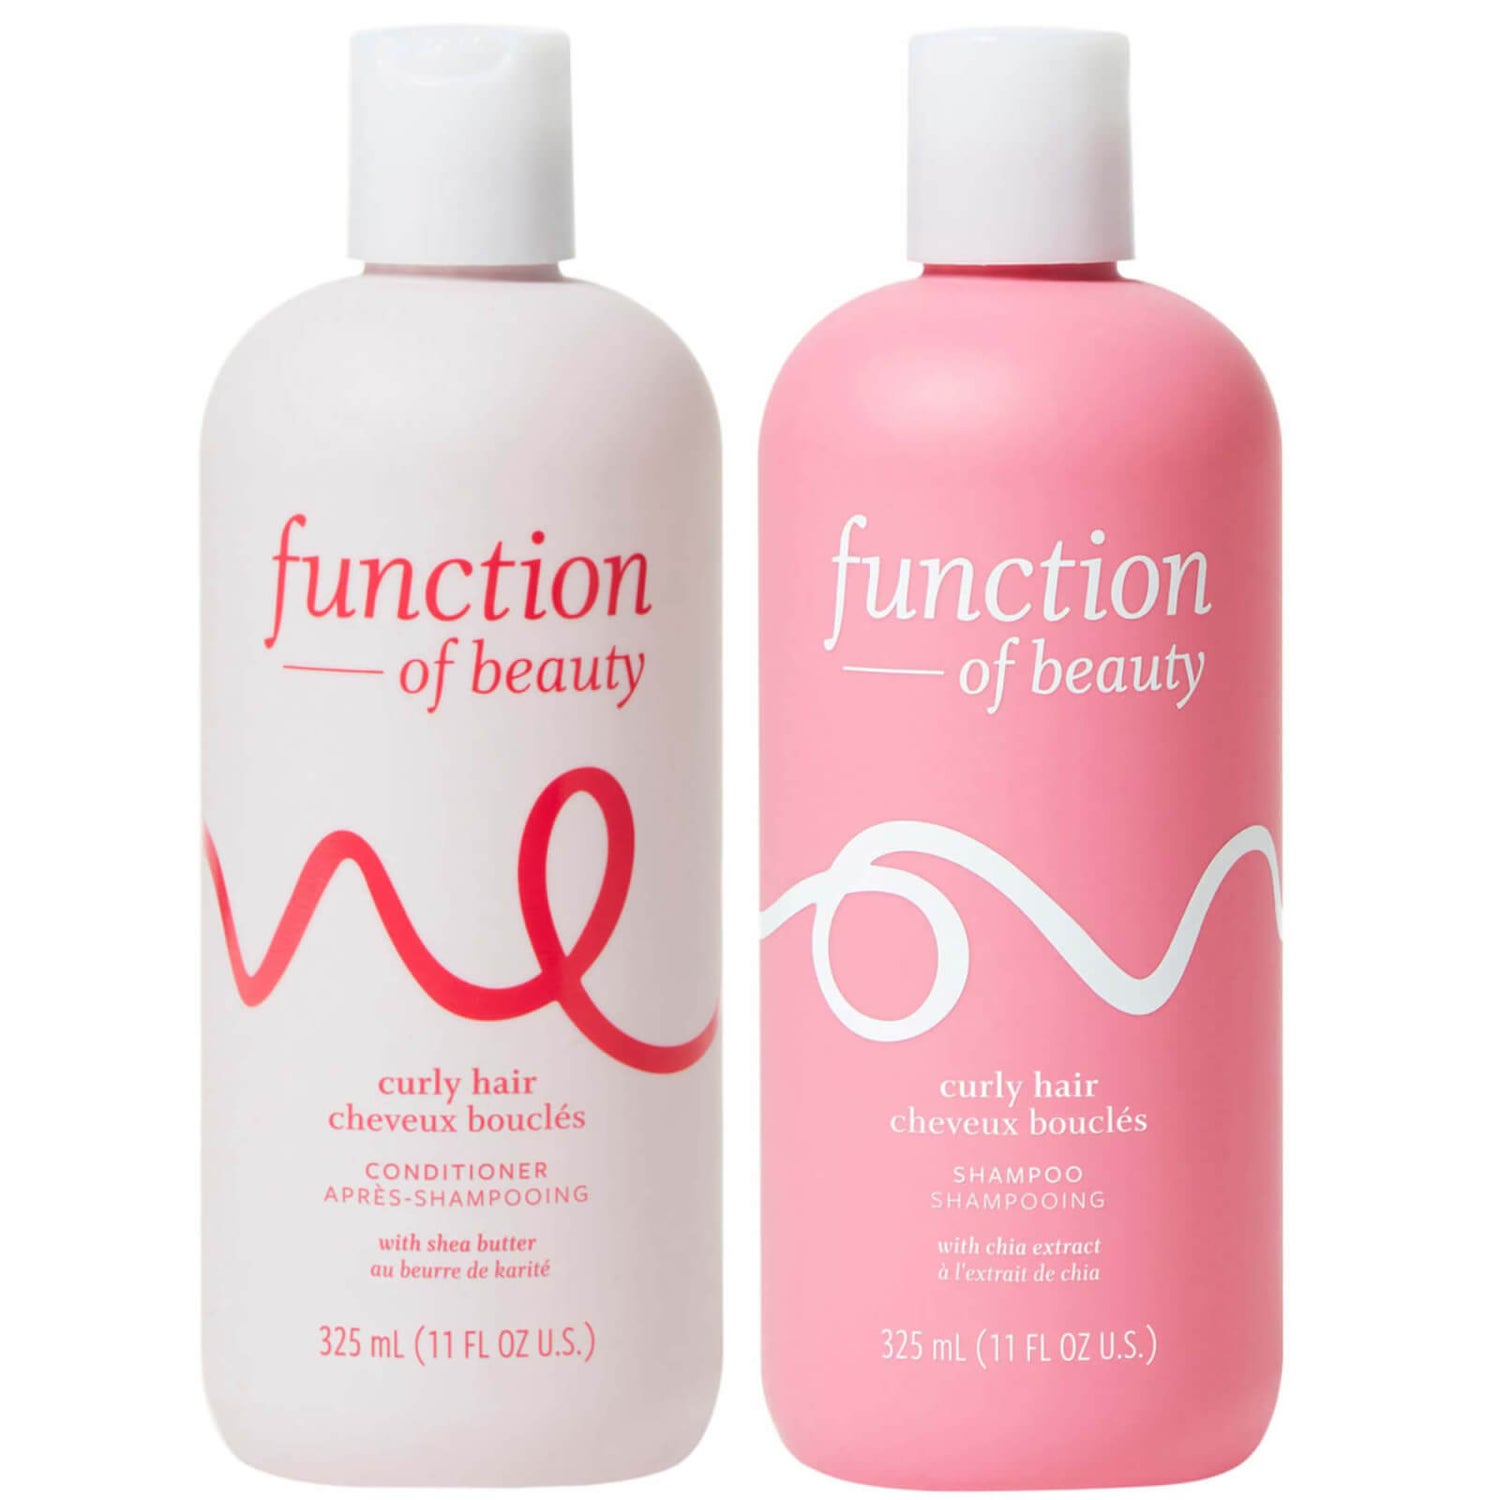 Function of Beauty Curly Hair Shampoo and Conditioner Duo | Cult Beauty